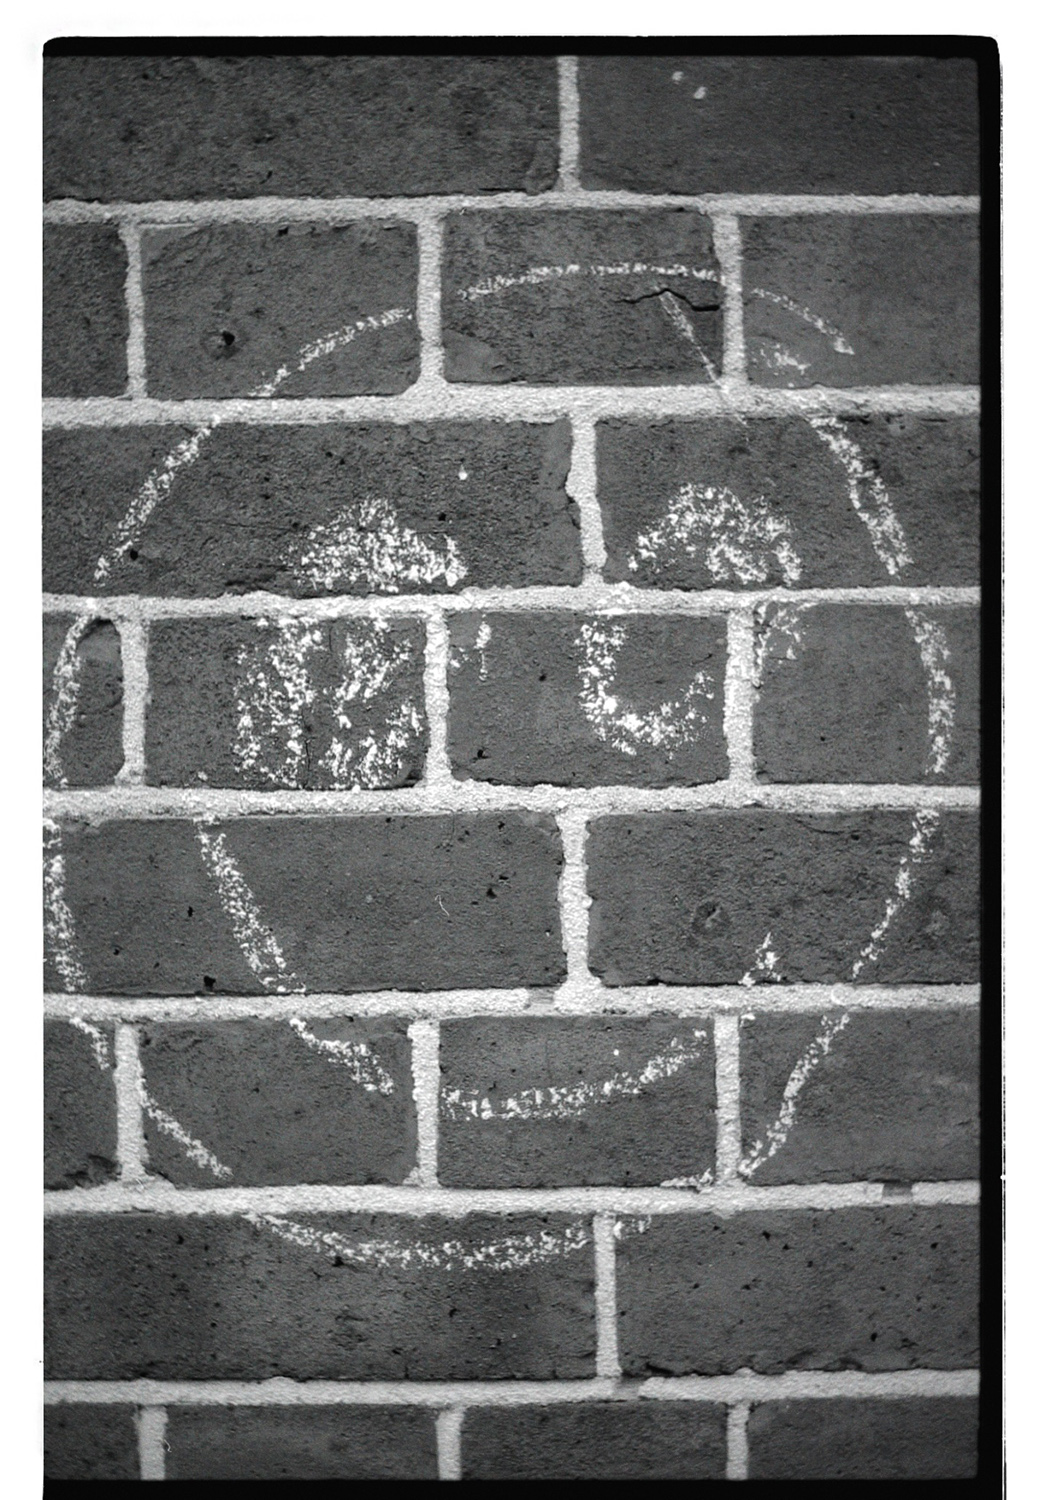 Smile on the Red Brick Wall - black and white